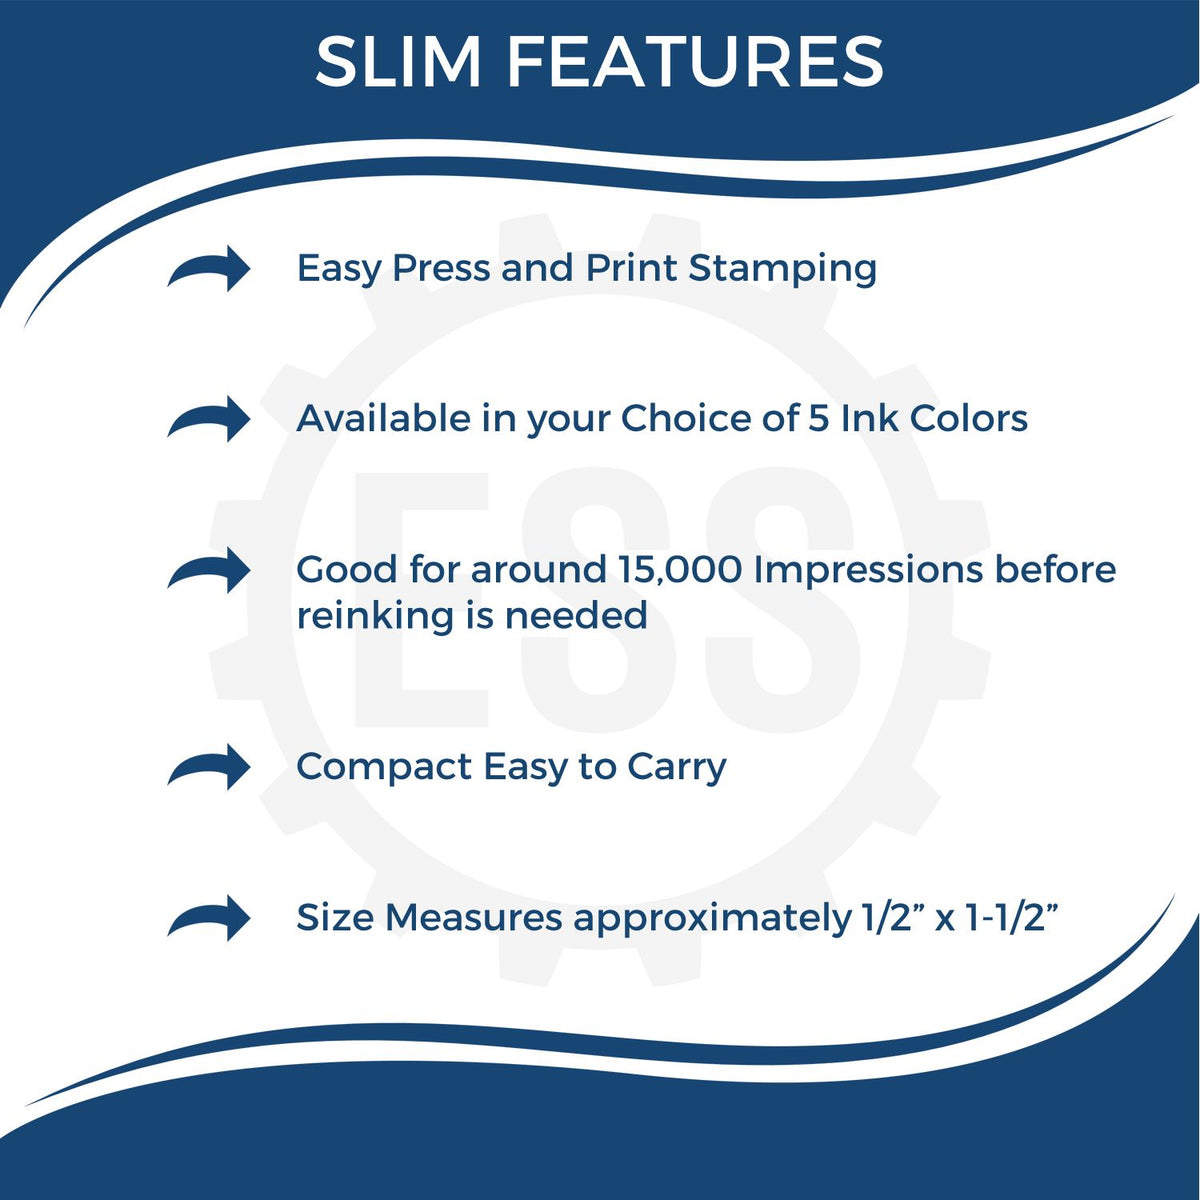 Slim Pre-Inked Faxed on Stamp